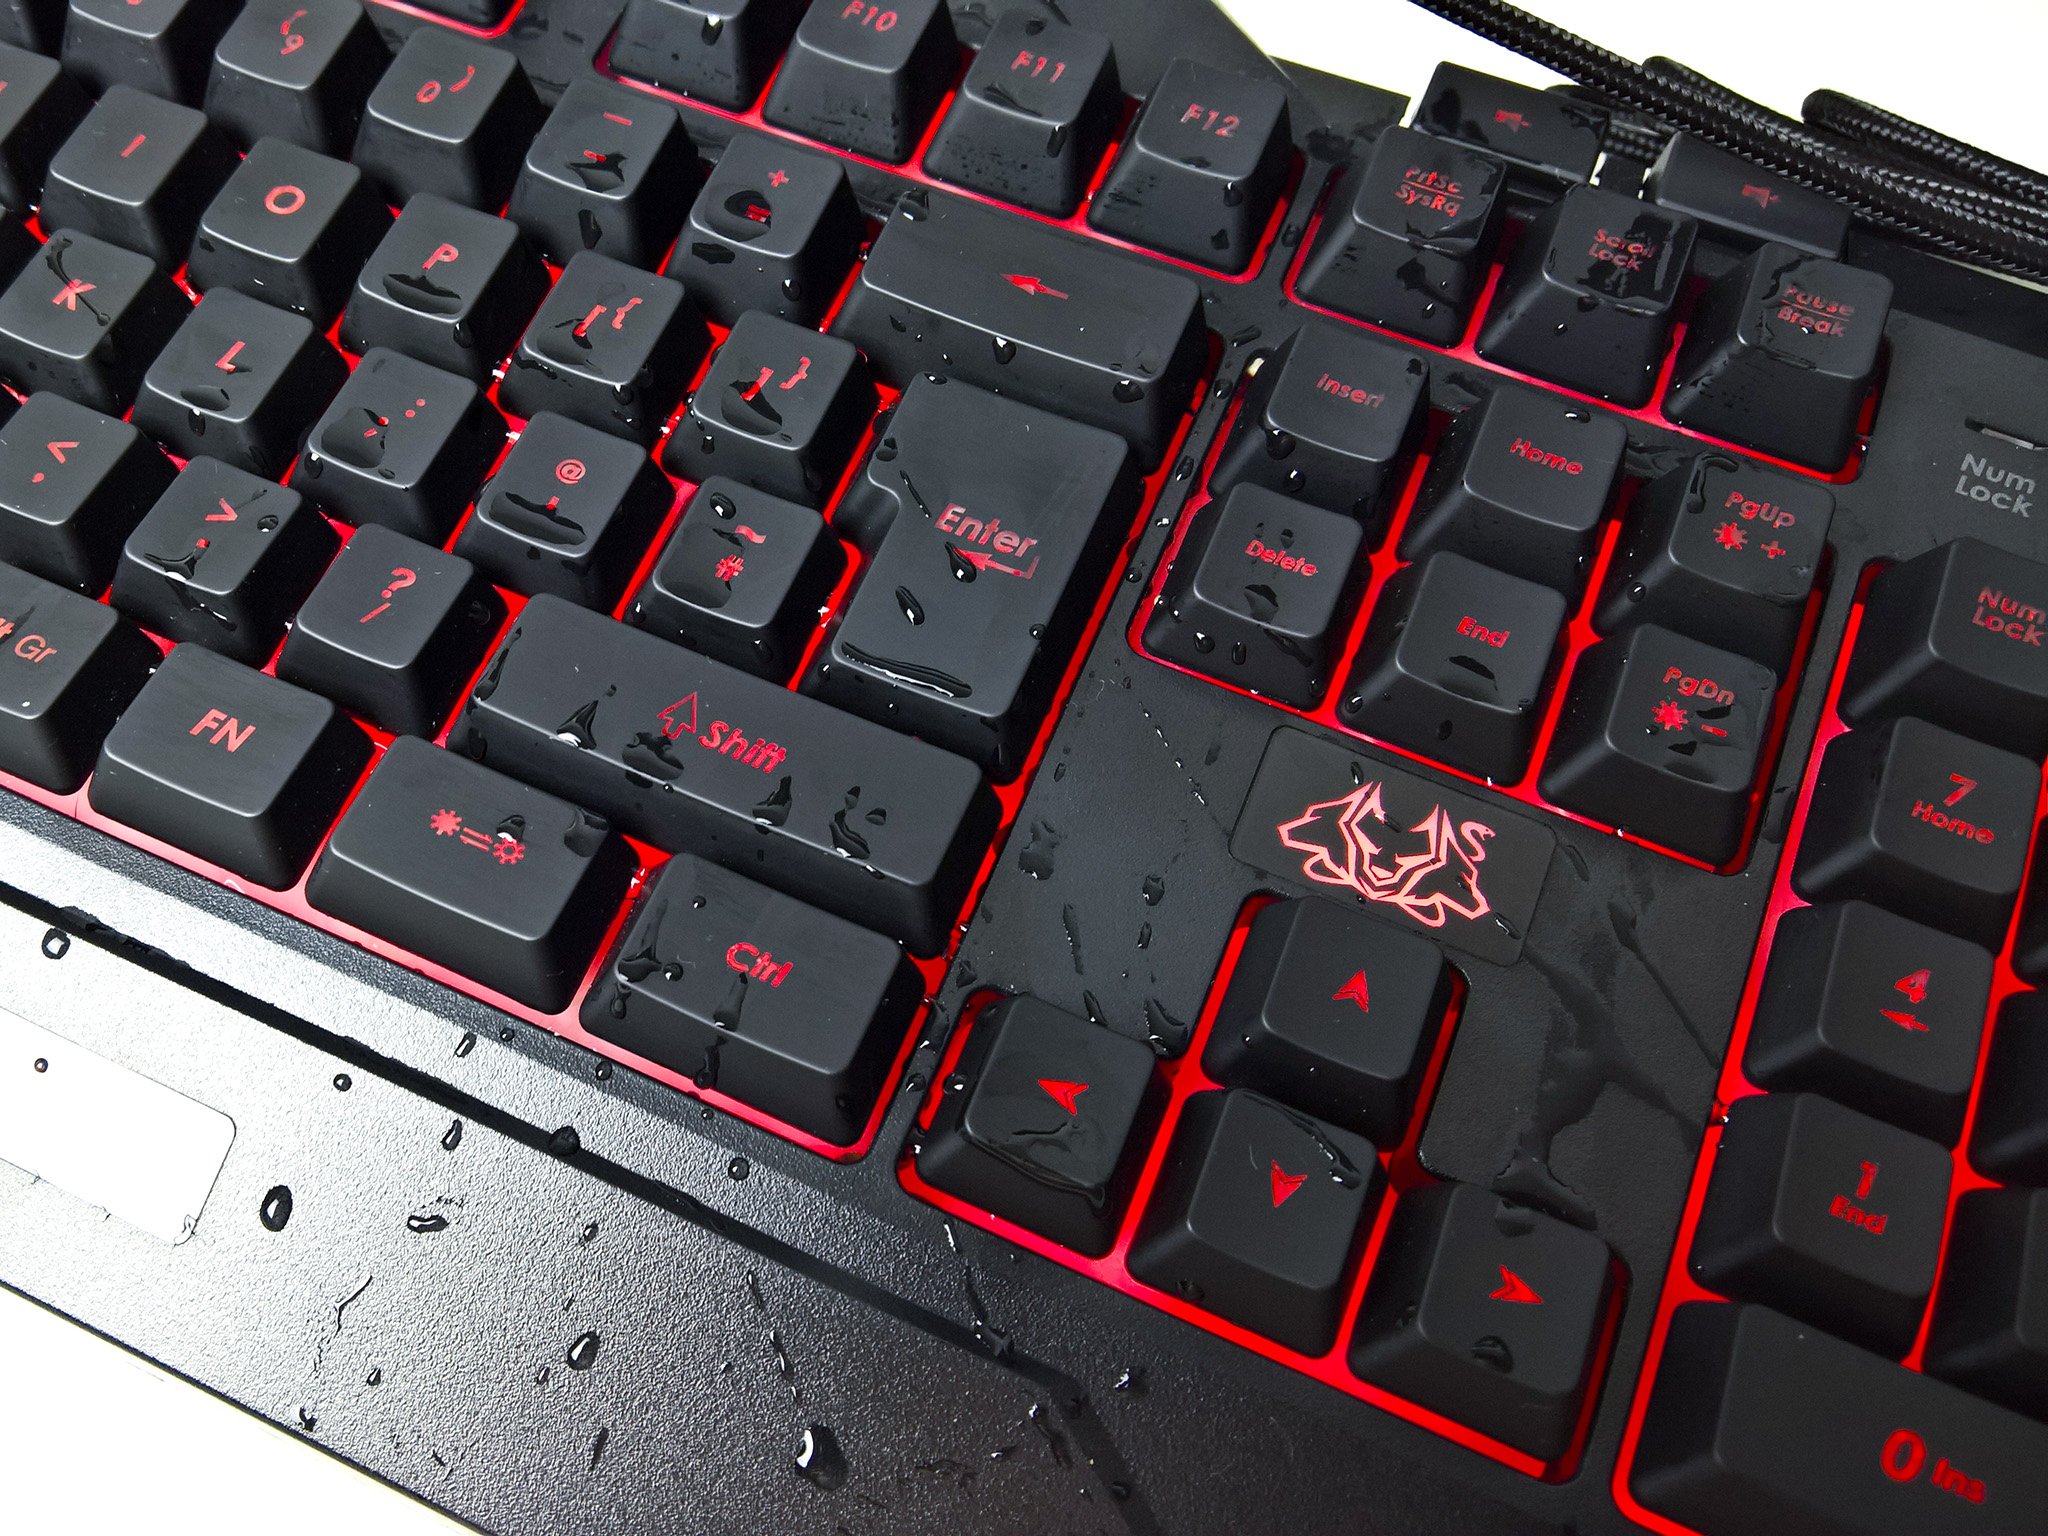 ASUS Cerberus keyboard review: Spill all you want, it doesn't care ...